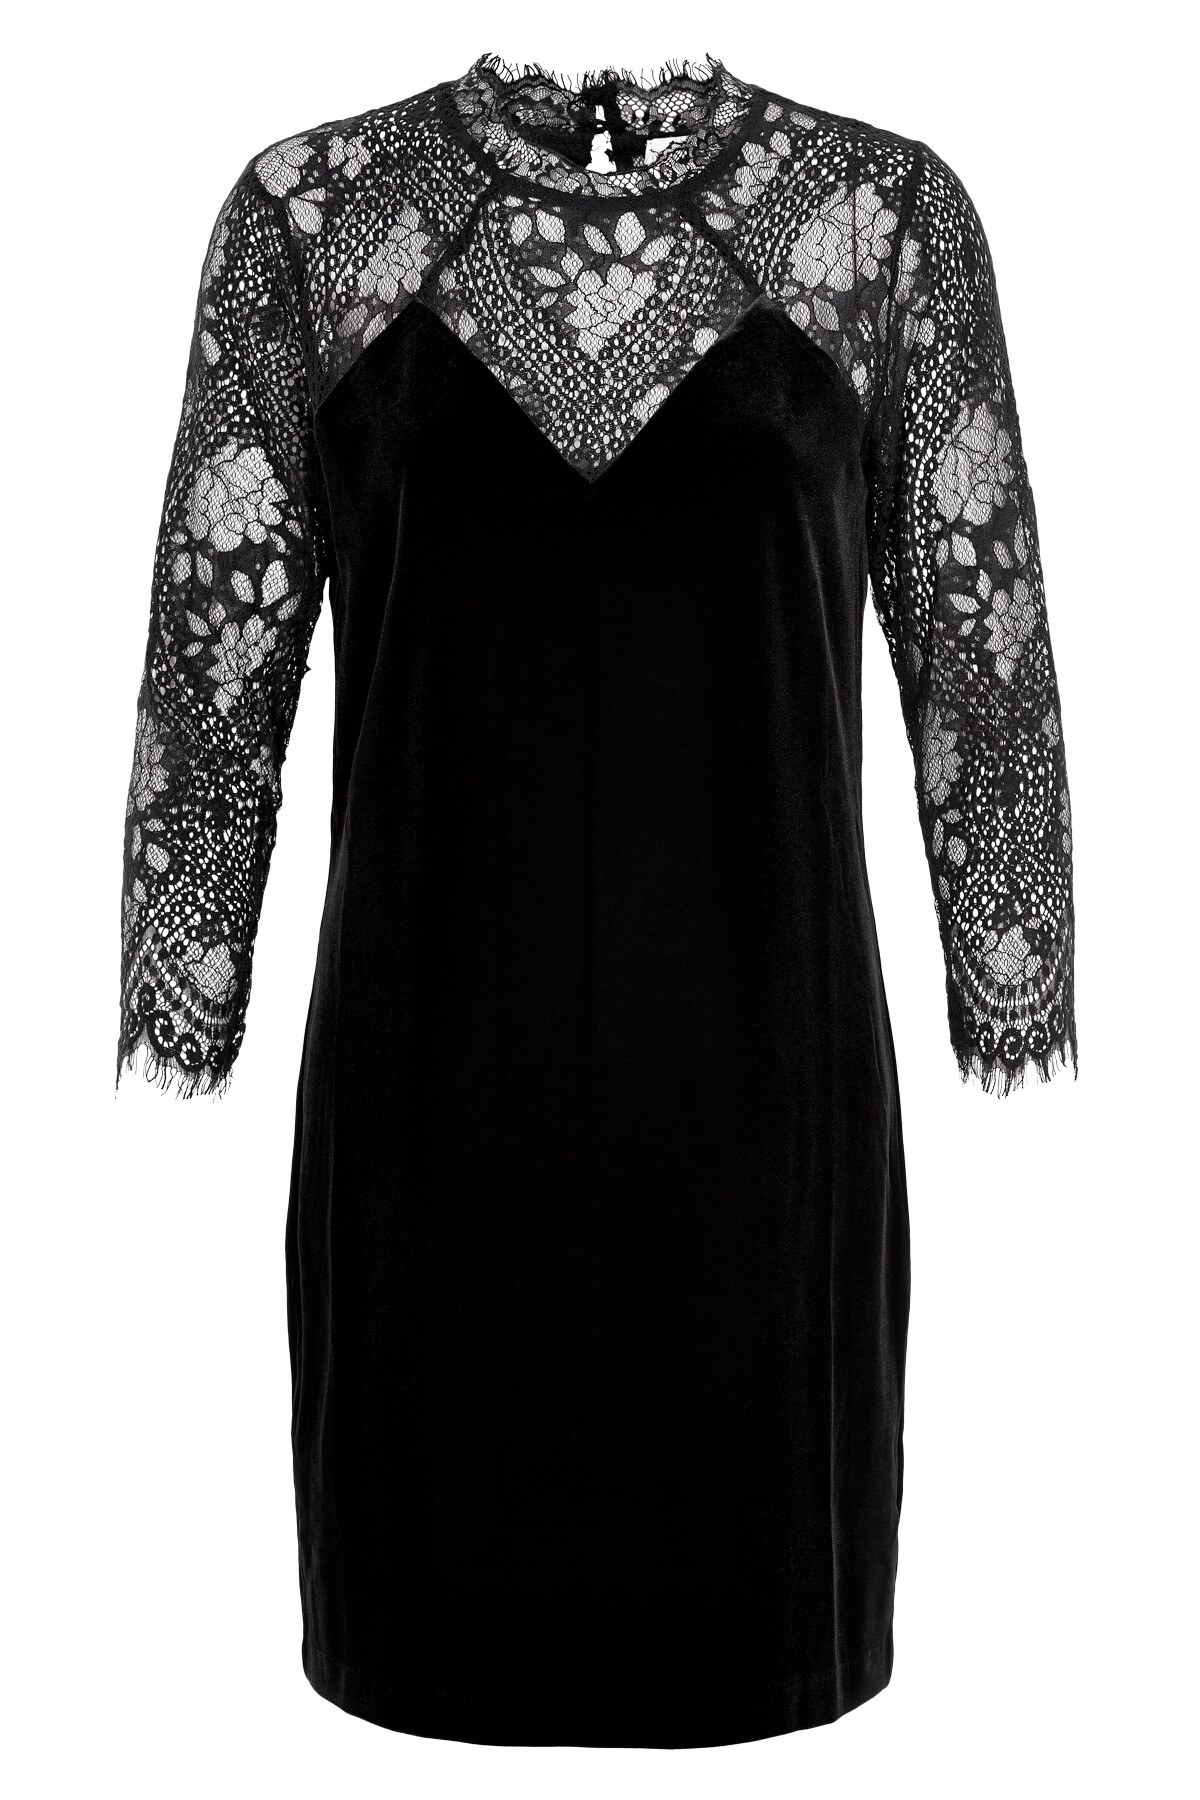 Neo Noir dresses 2020 - Big selection - Click here to buy